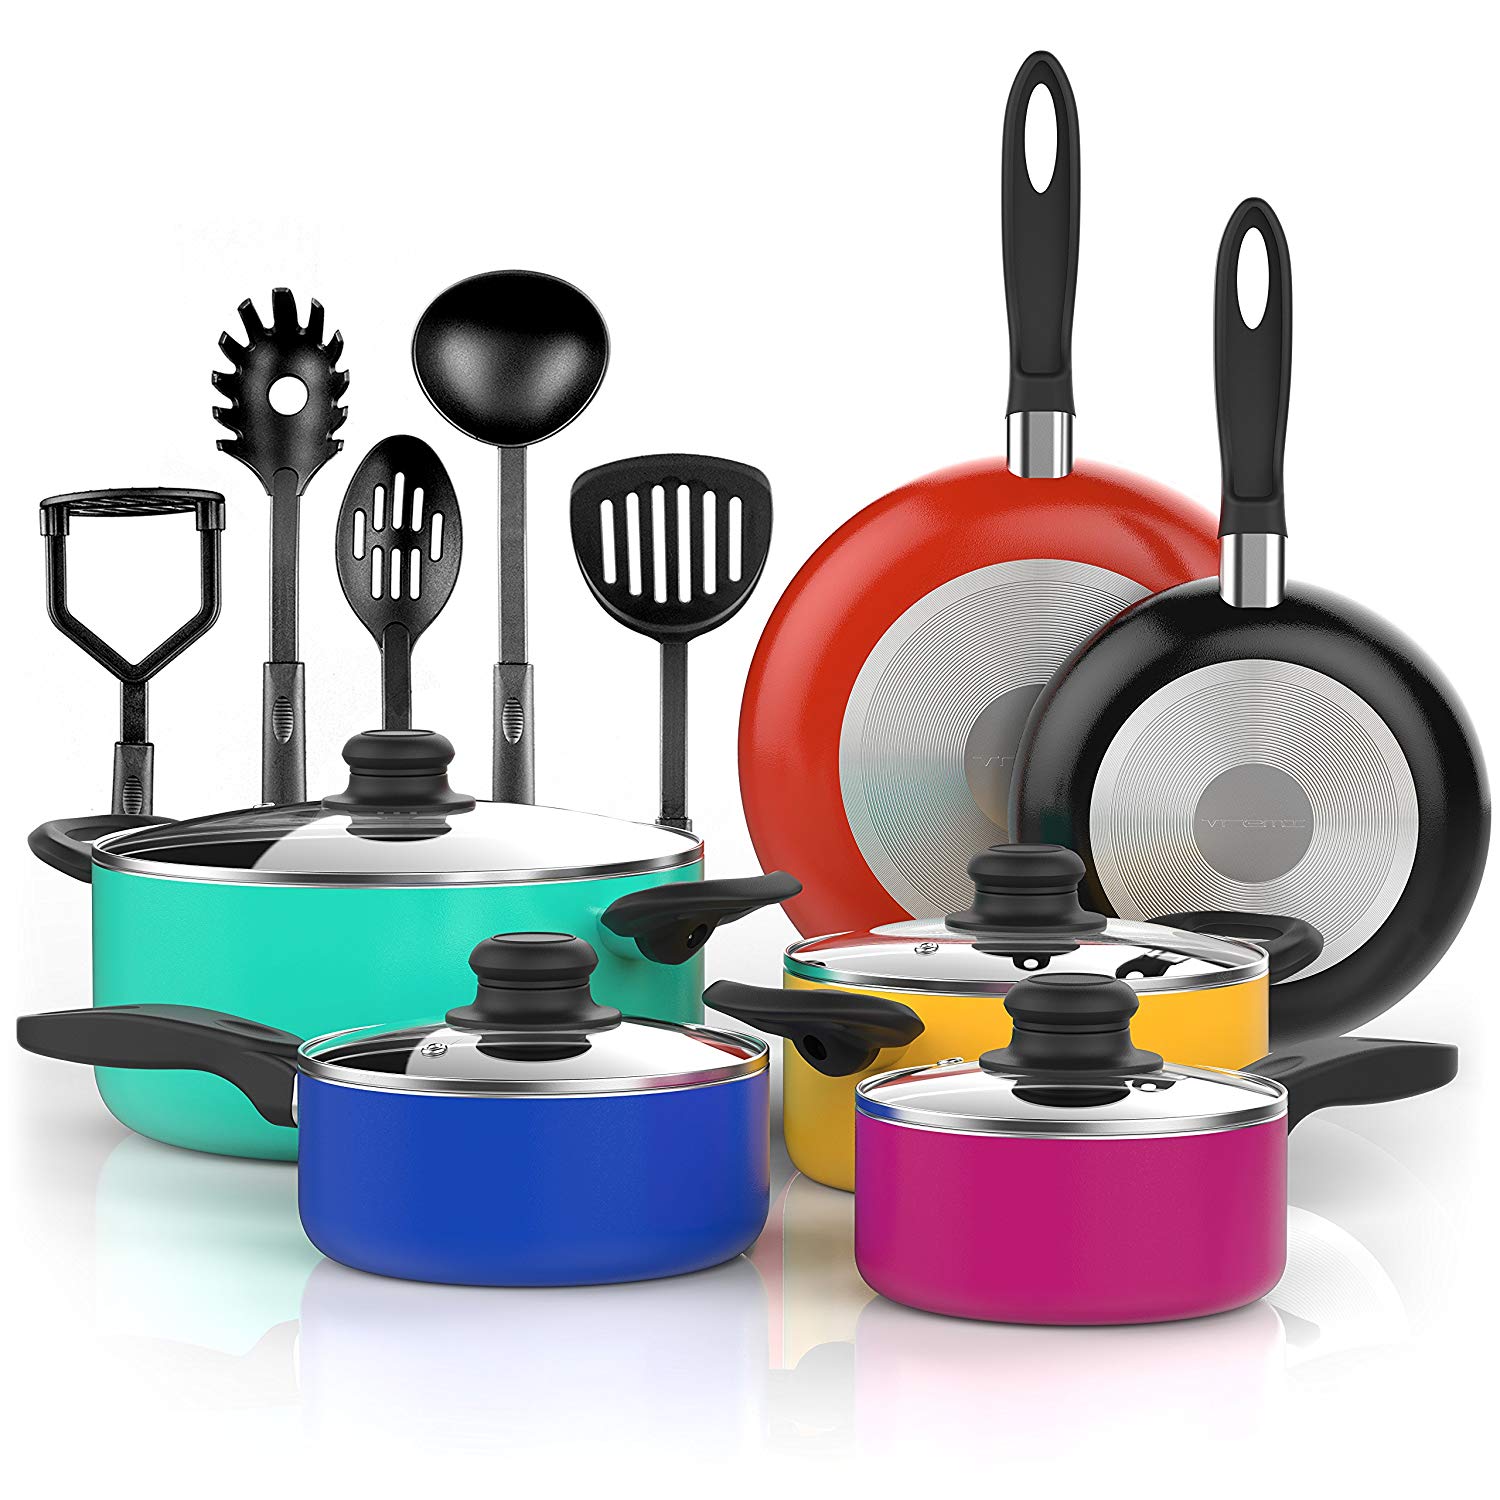 Vremi 15 Piece Nonstick Cookware Set - Colored Kitchen Pots and Pans Set Nonstick with Cooking Utensils - Purple Teal Red Blue Yellow Pots and Non Stick Pans Set